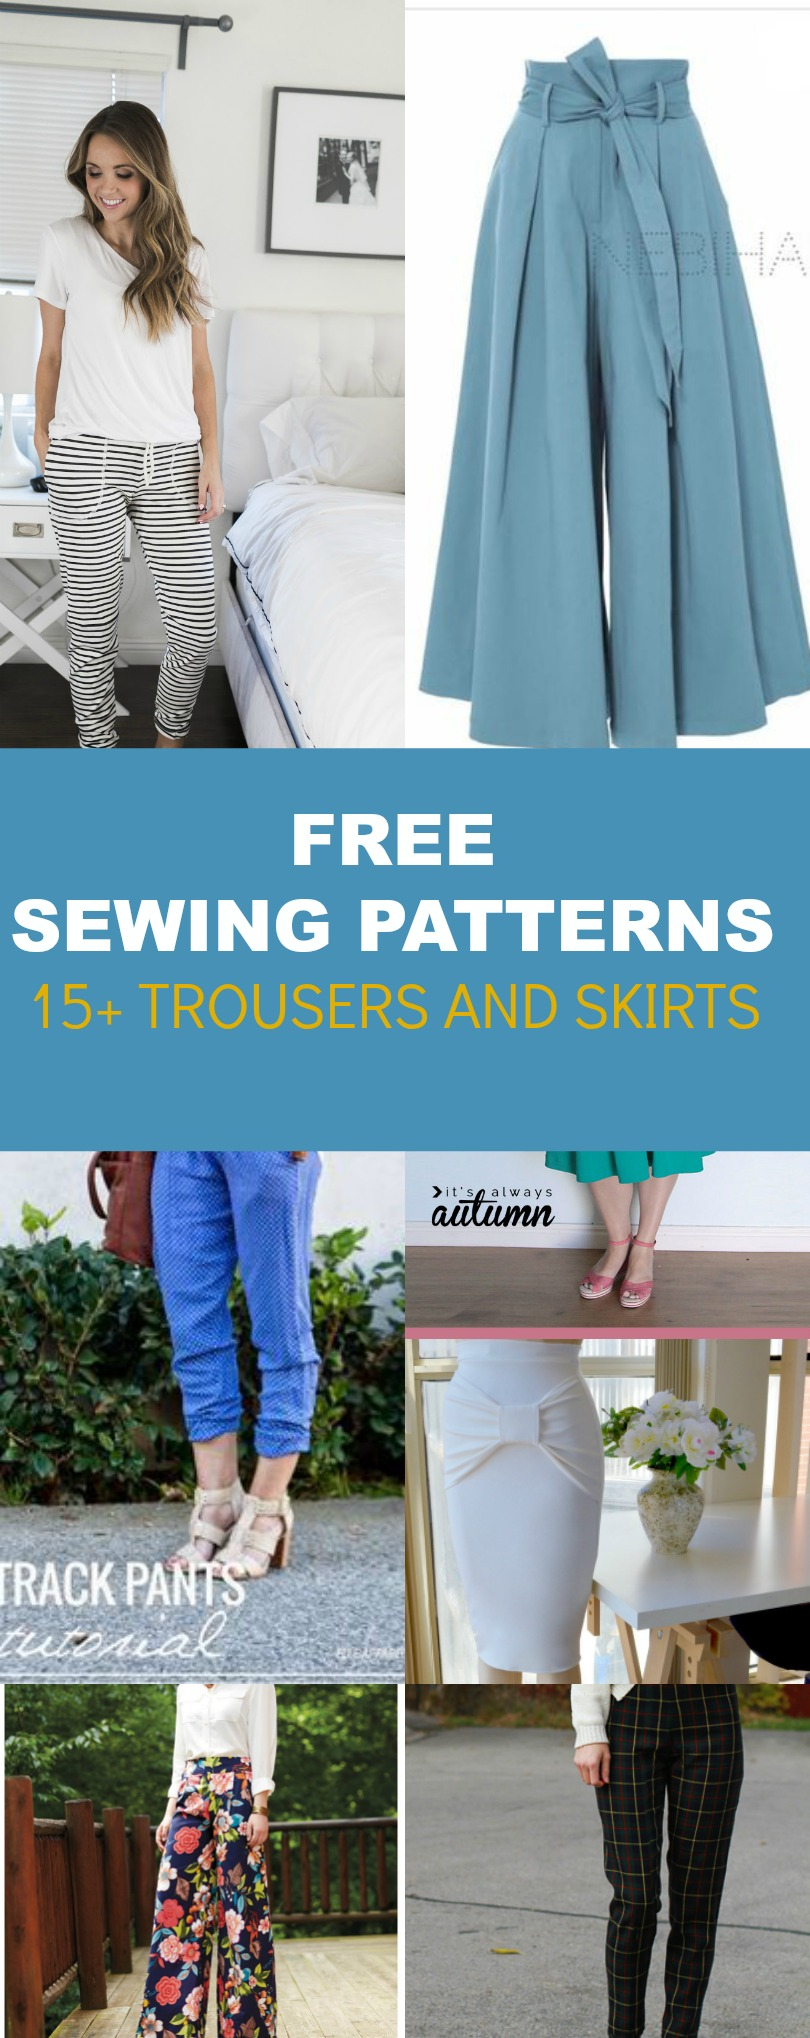 Free Sewing Patterns Free Pattern Alert 15 Pants And Skirts Sewing Tutorials On The